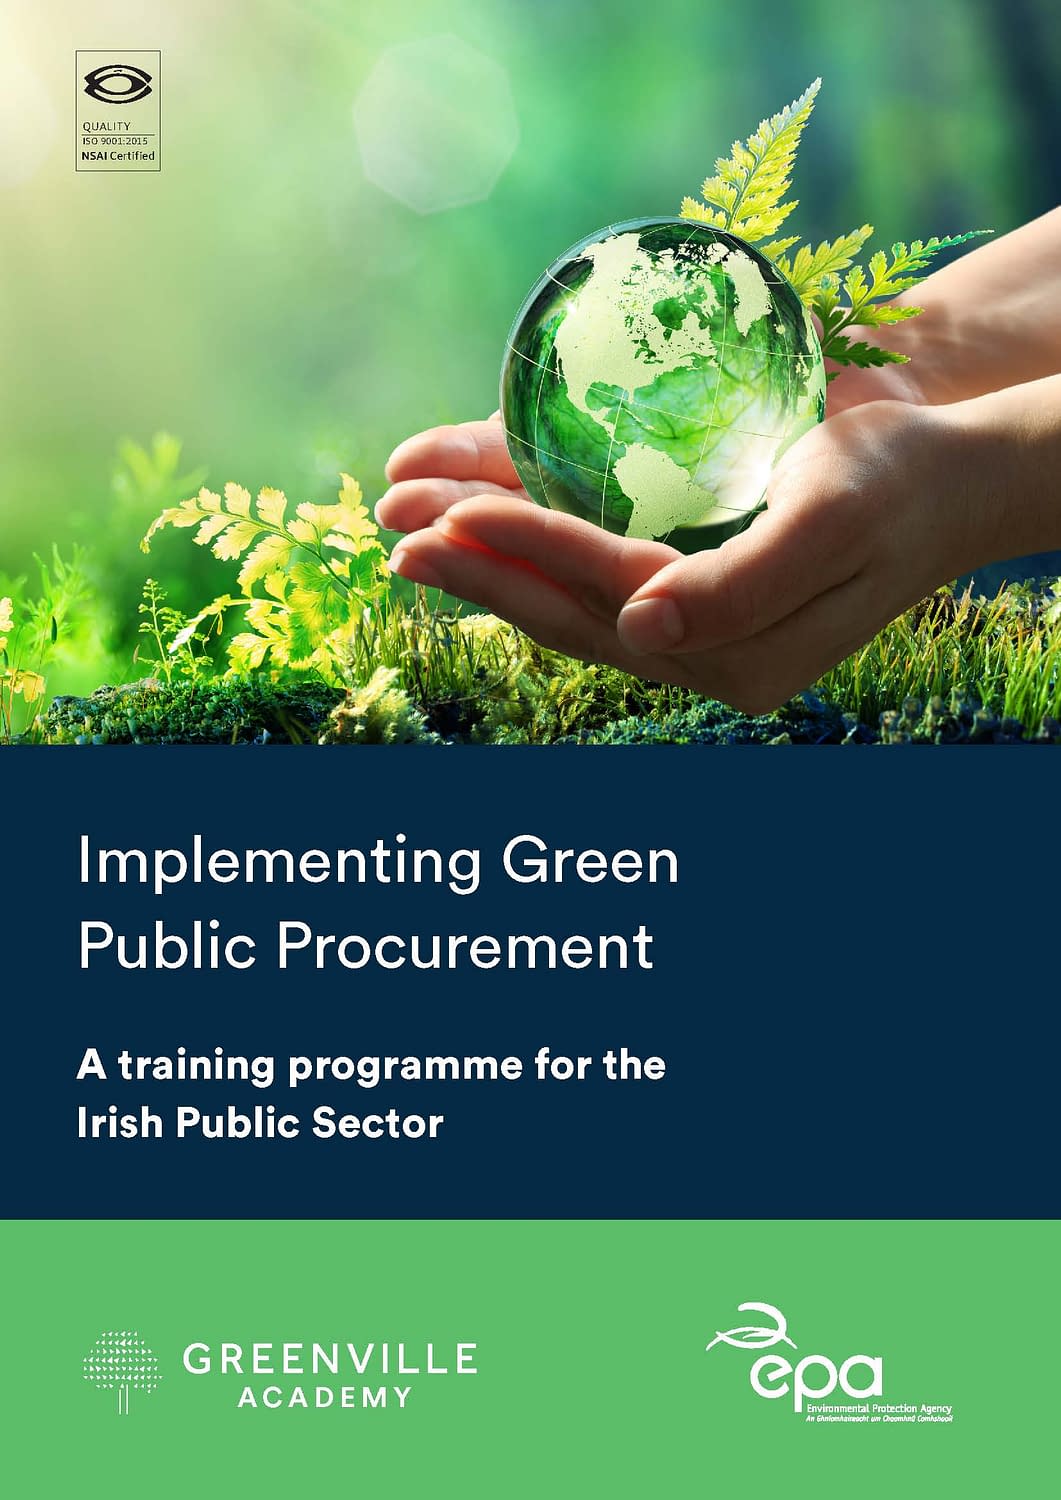 Green Procurement brochure March 2021_Page_1